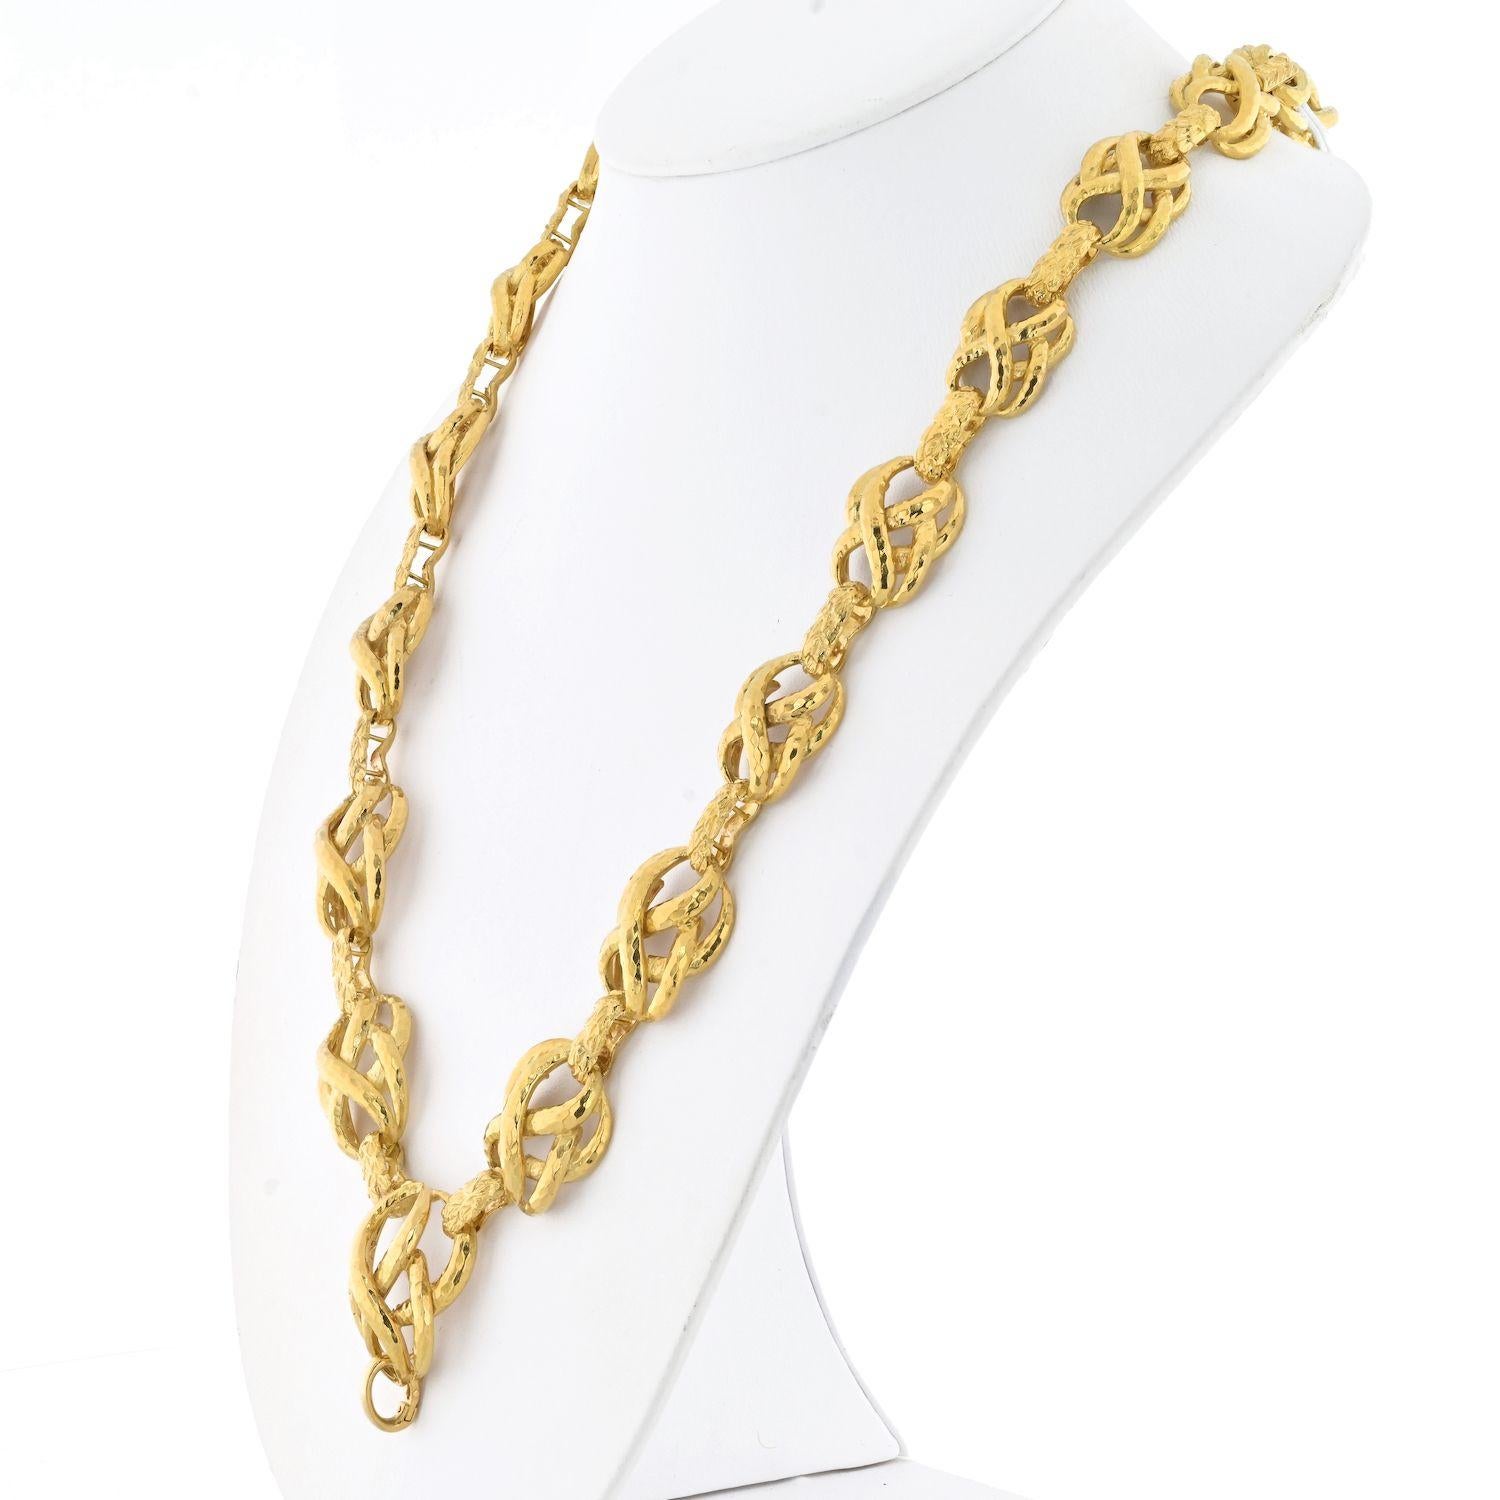 Elevate your jewelry collection with the timeless elegance of the David Webb 18K Yellow Gold Textured Twisted Link Necklace. Spanning 25 inches in length, this exquisite piece is a testament to Webb's unparalleled artistry. The necklace features a